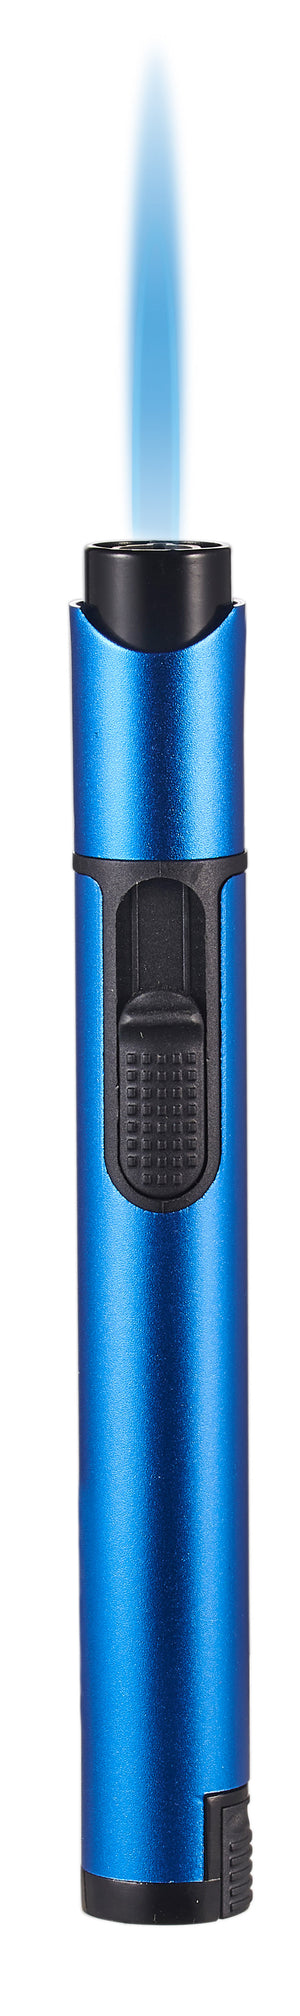 Visol Stormy Single Flame Torch Lighter - Blue